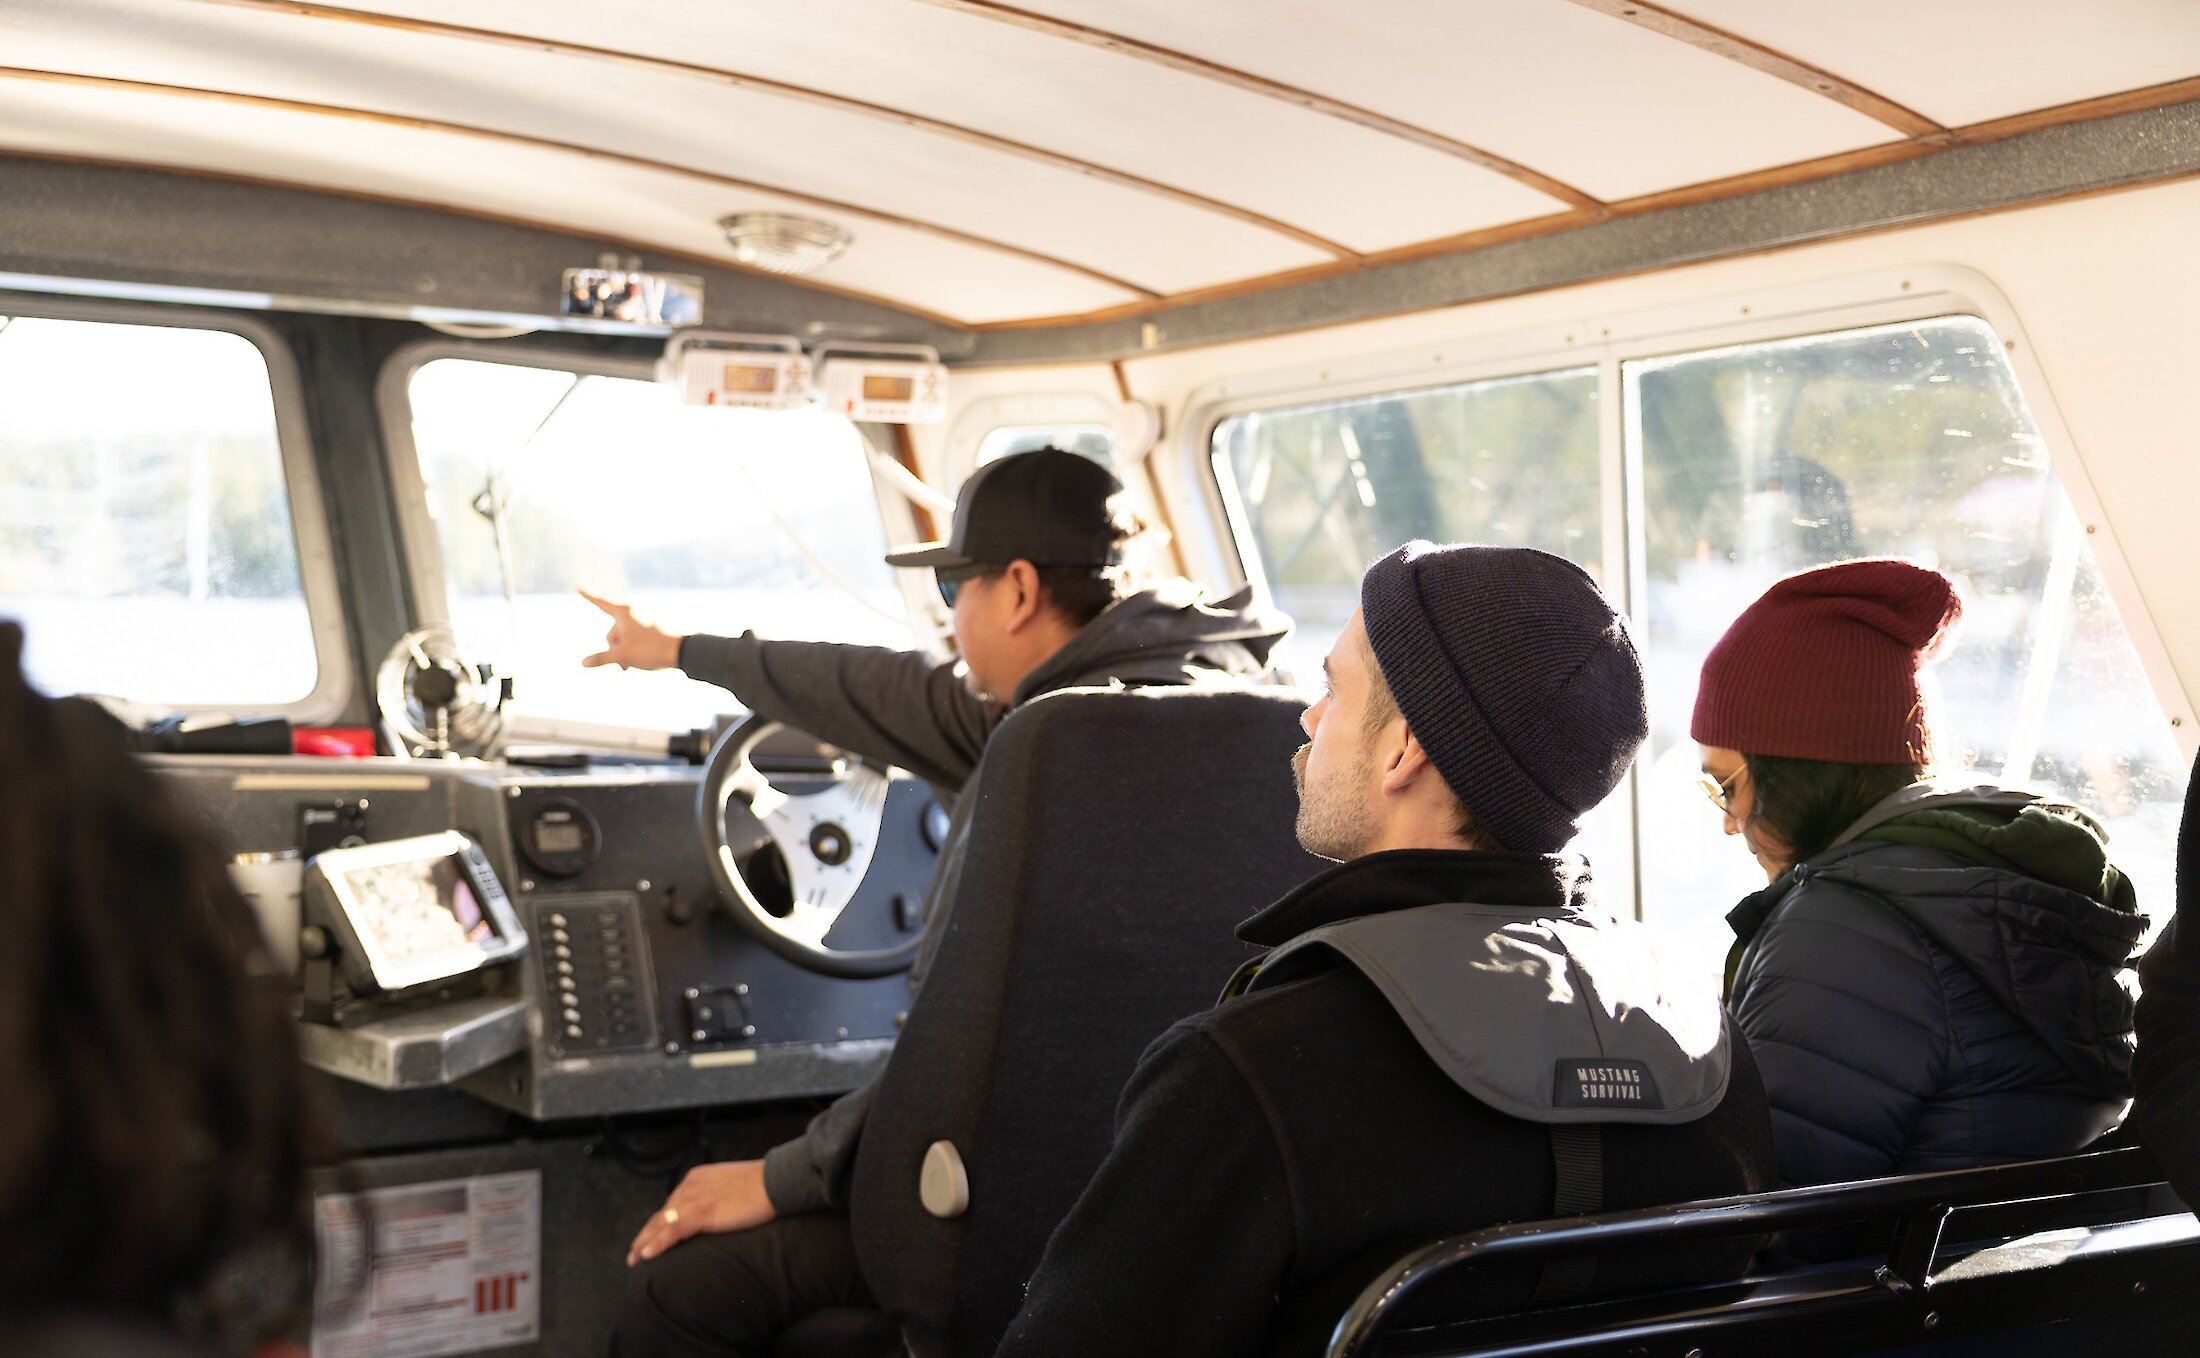 Inside of a whale watching boat with people going on a tour